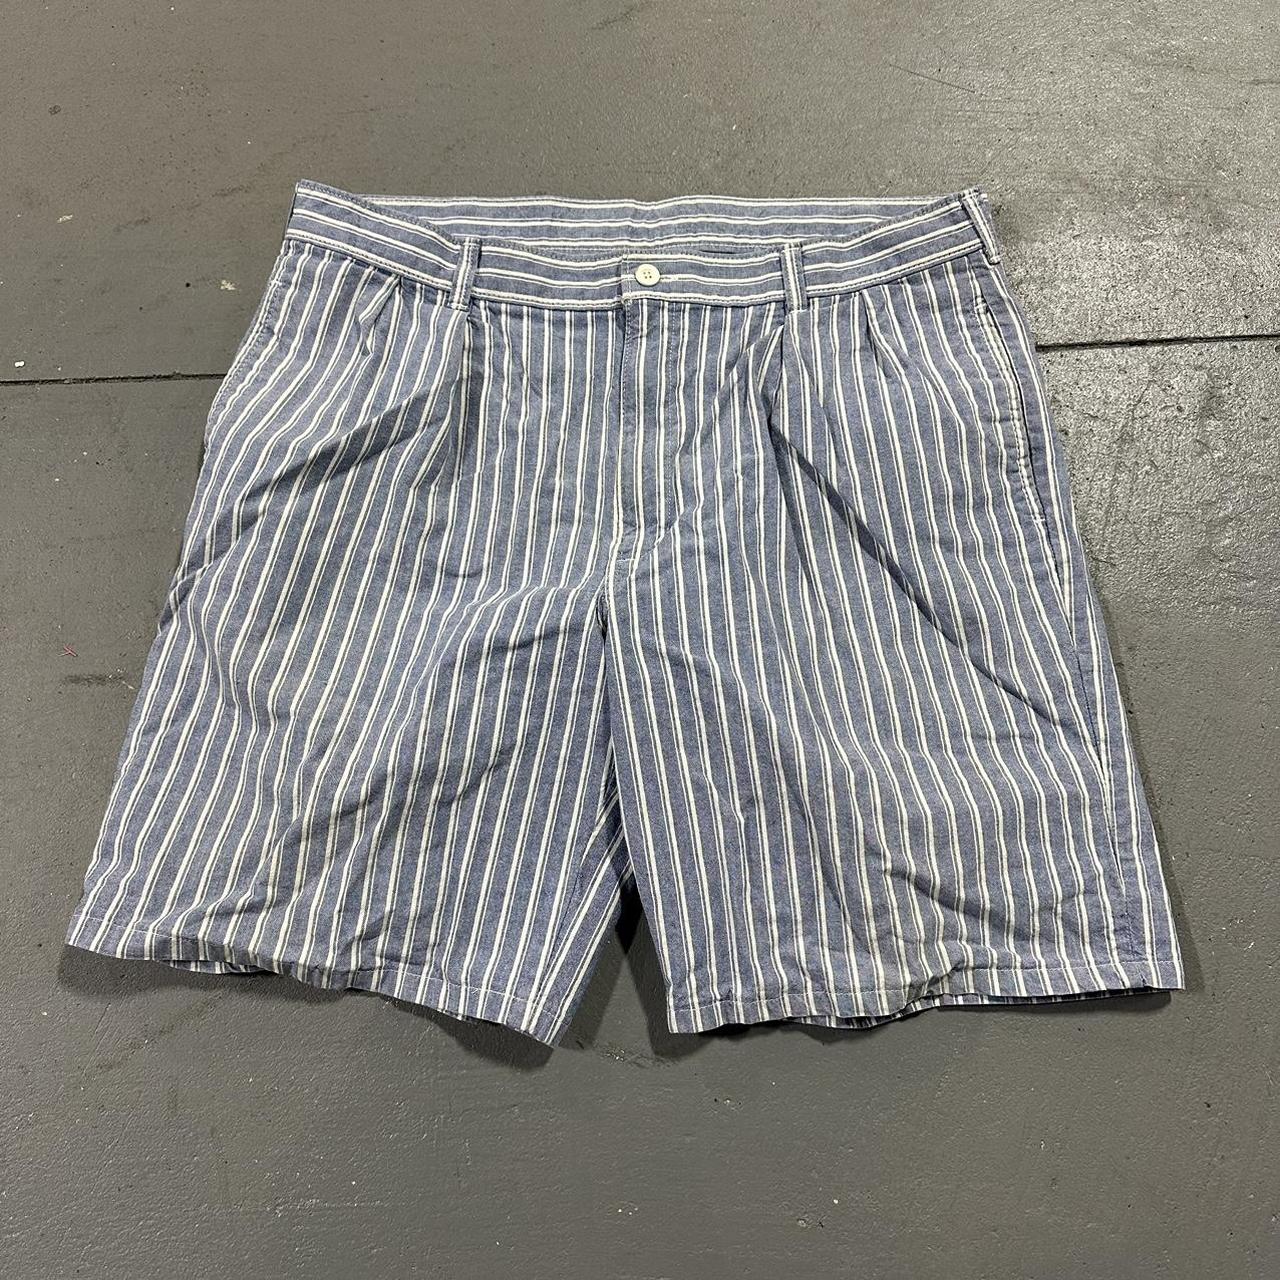 Duck and Cover Men's White and Blue Shorts